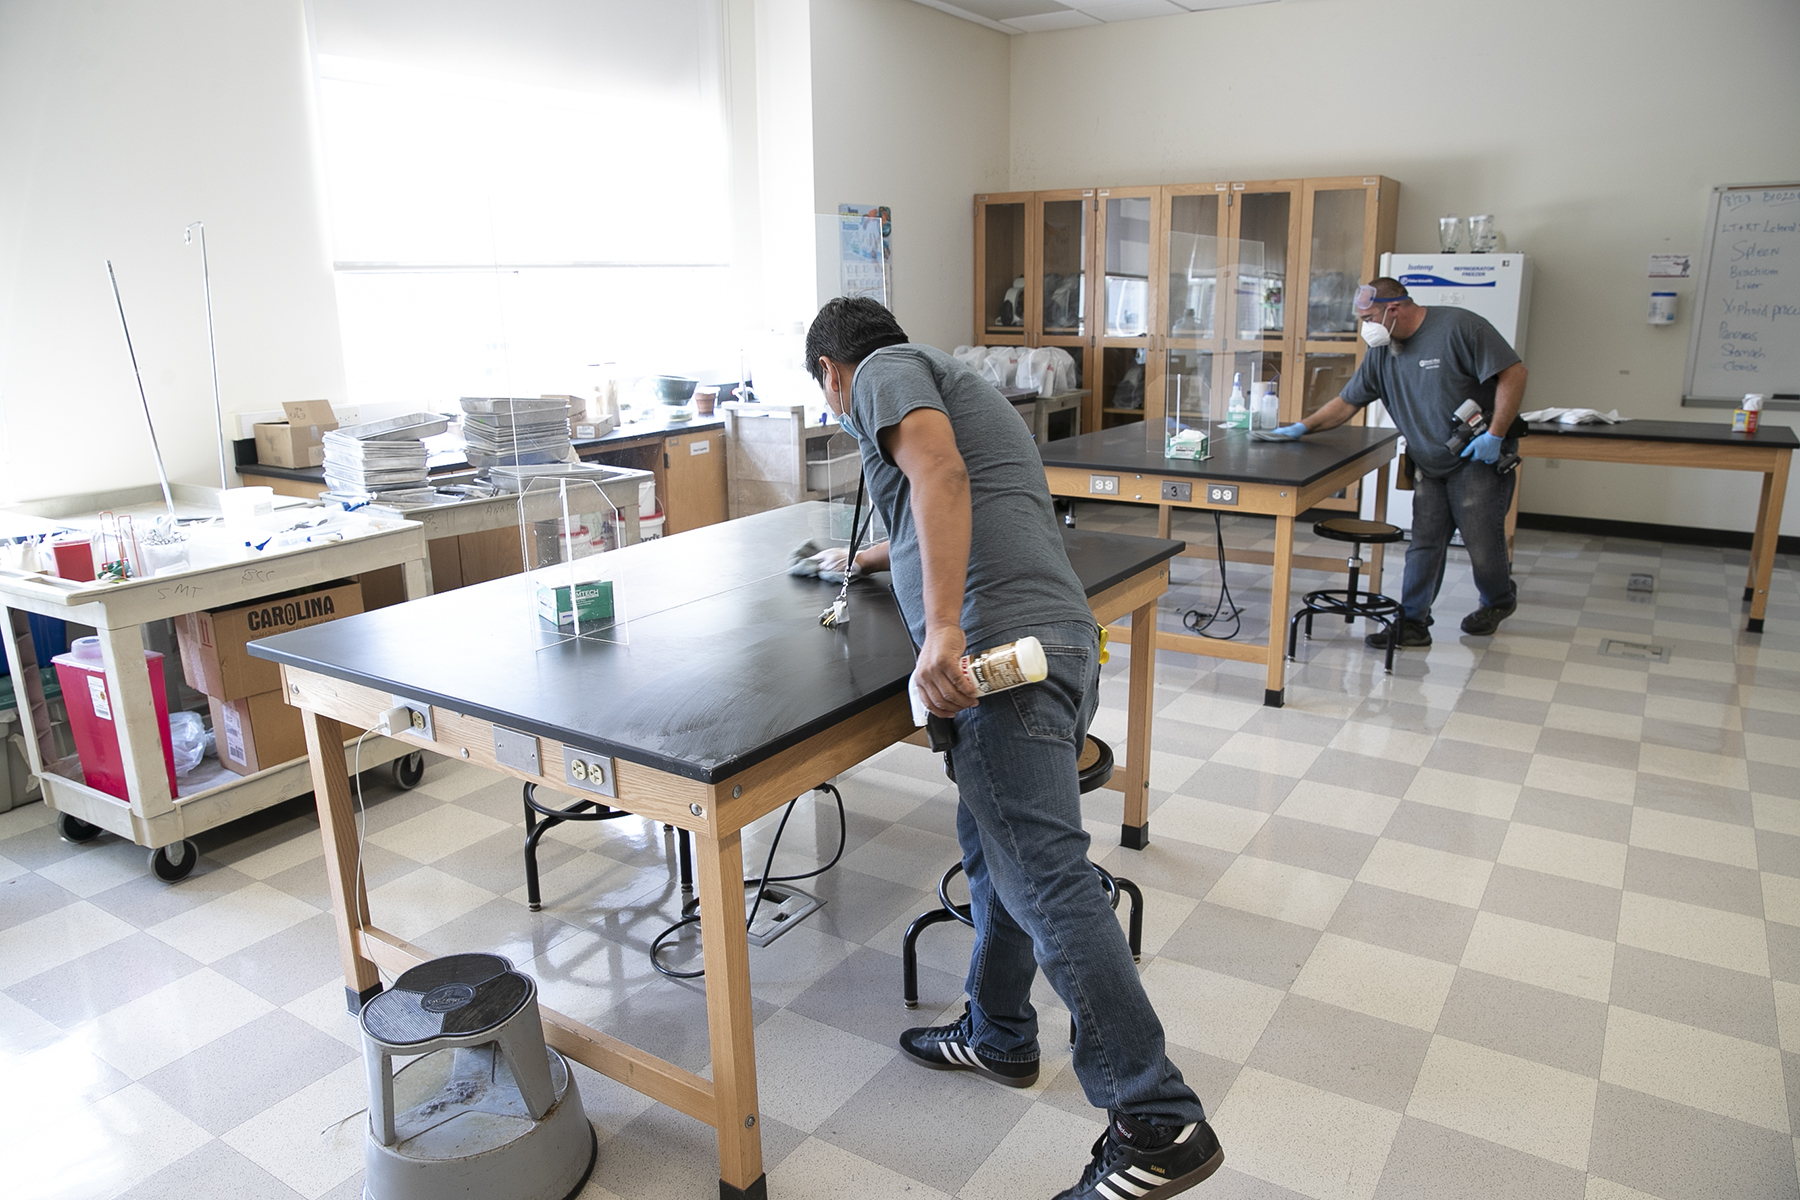 Facilities staff cleaning a classroom